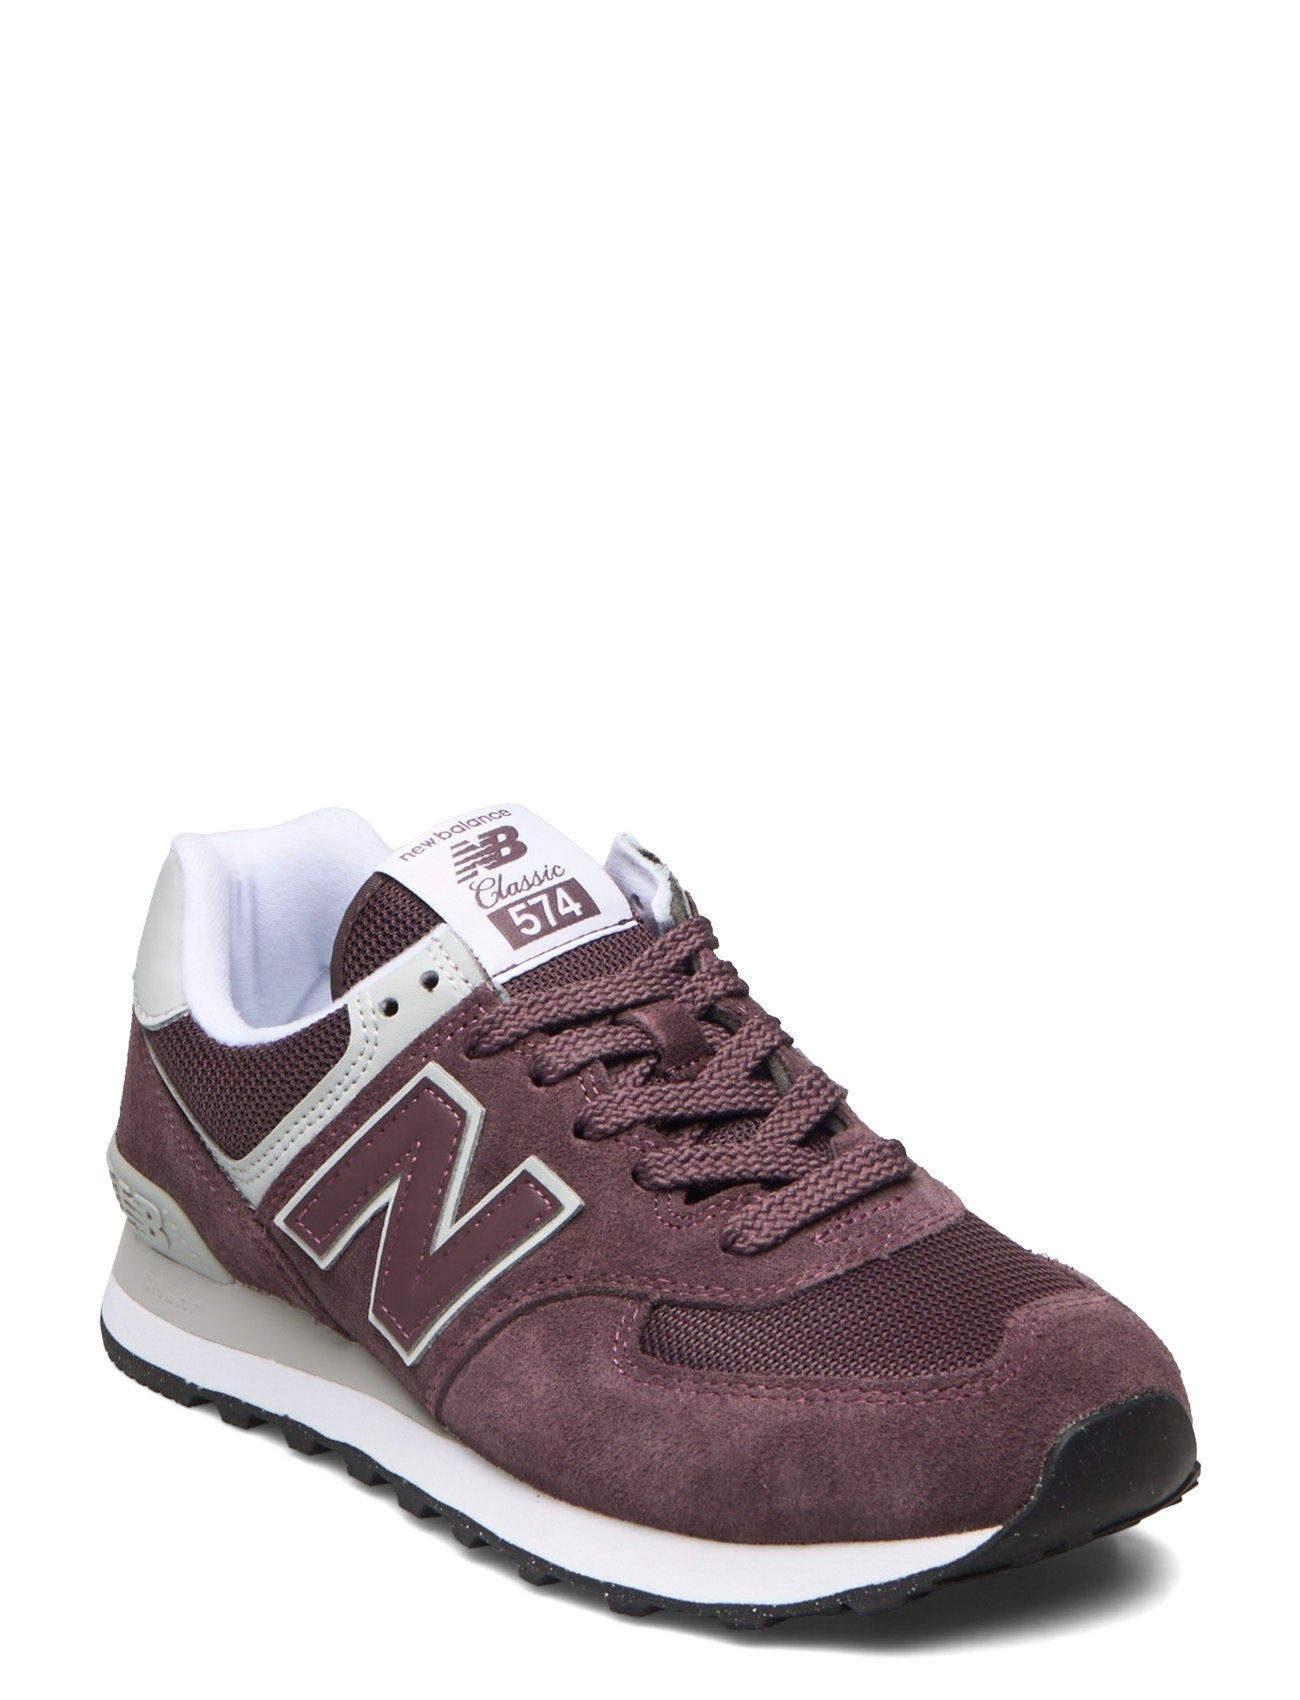 New Balance 574 - sneakers -